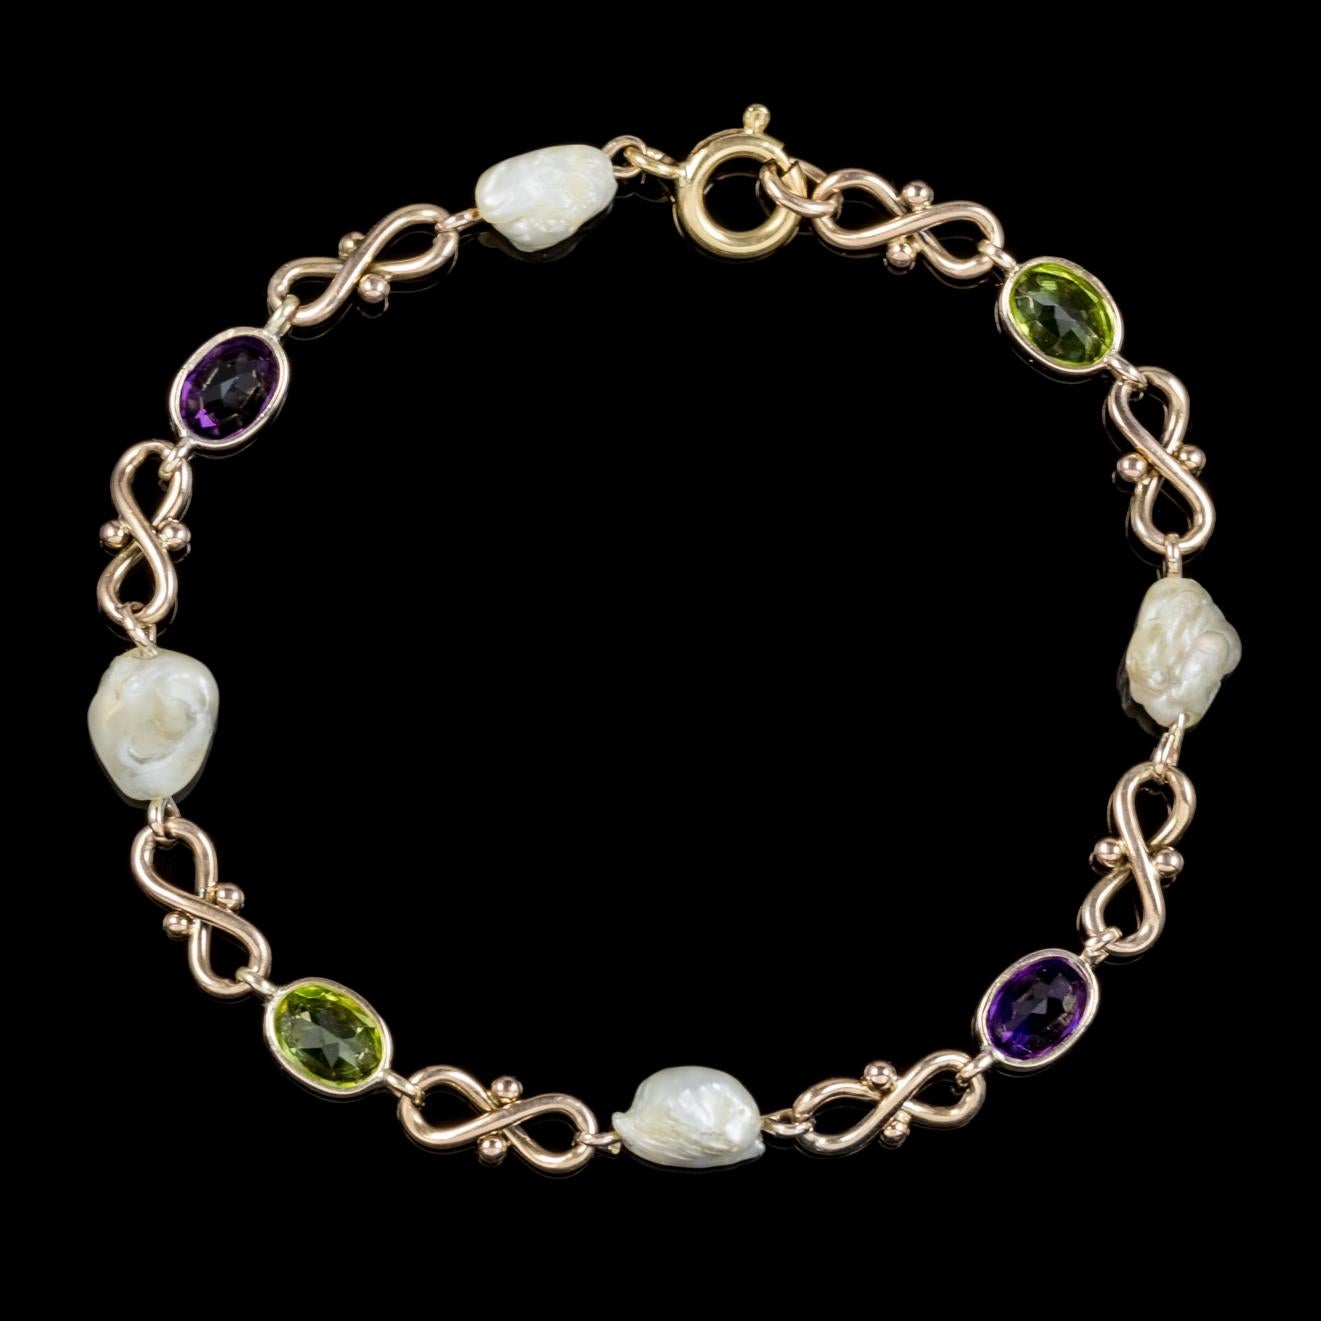 A fabulous antique Victorian bracelet C. 1900, adorned with green Peridots, violet Amethyst’s and lovely white Baroque Pearls which represent the Suffragette movement. 

Suffragettes liked to be depicted as feminine, their jewellery popularly